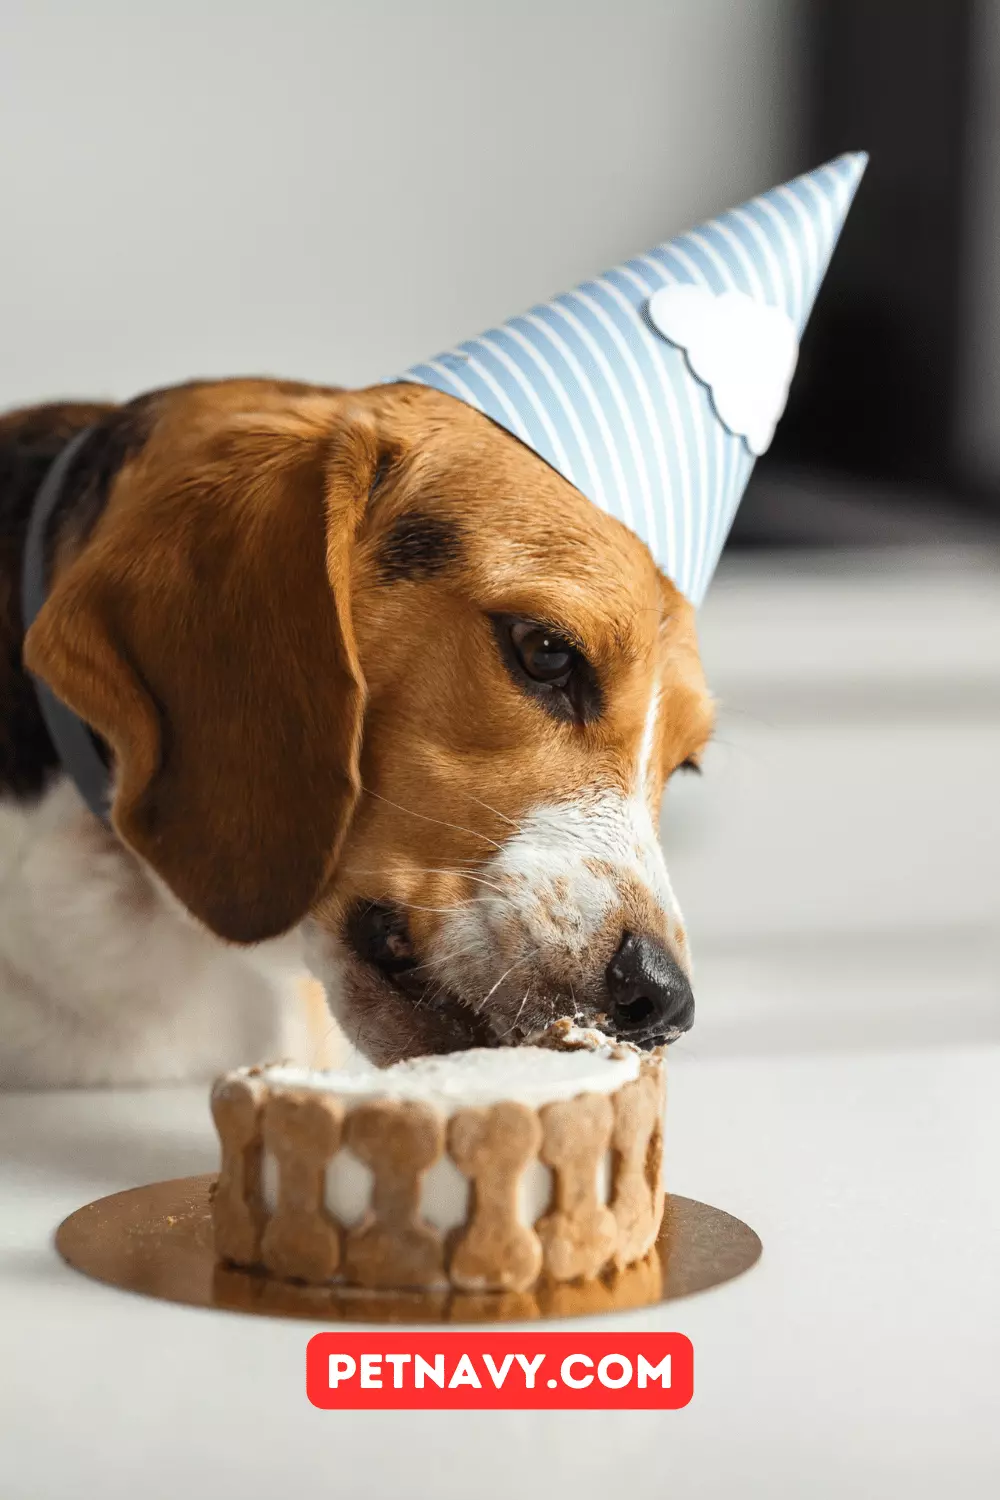 15 Delicious Dog Birthday Cakes: Celebrate Your Pup’s Special Day